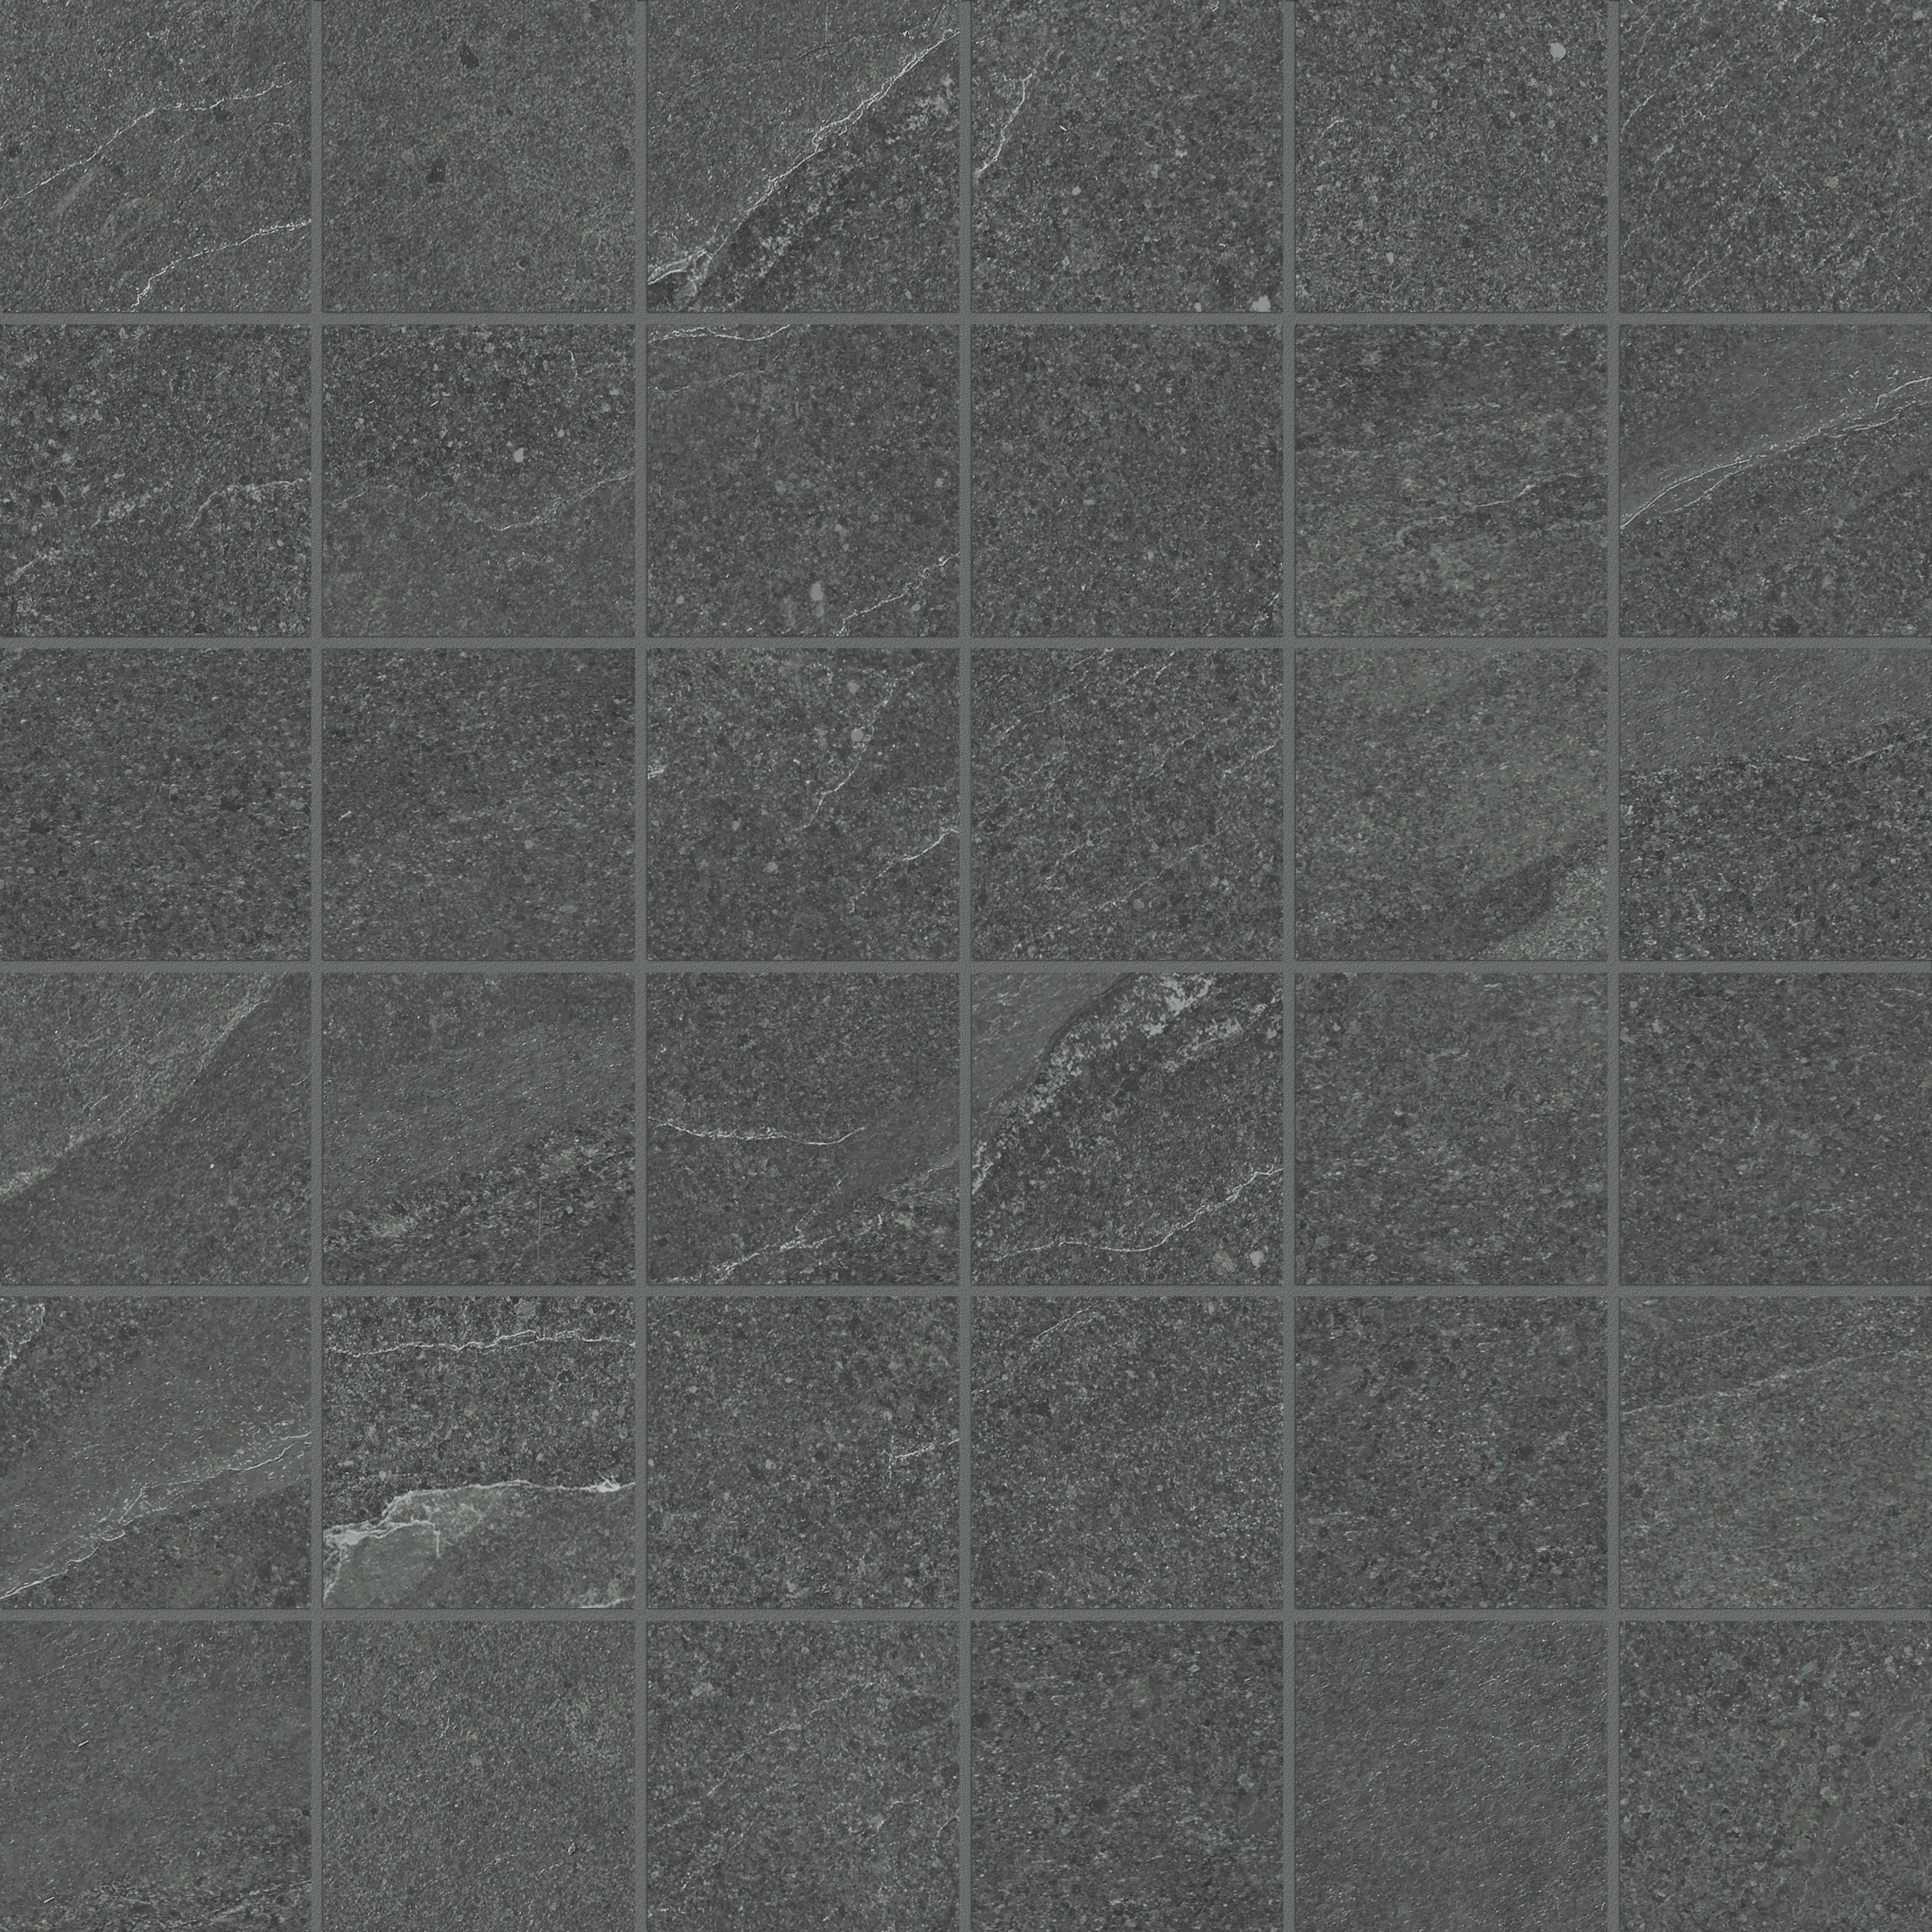 carbon straight stack 2x2-inch pattern color body porcelain mosaic from nord anatolia collection distributed by surface group international matte finish straight edge edge mesh shape